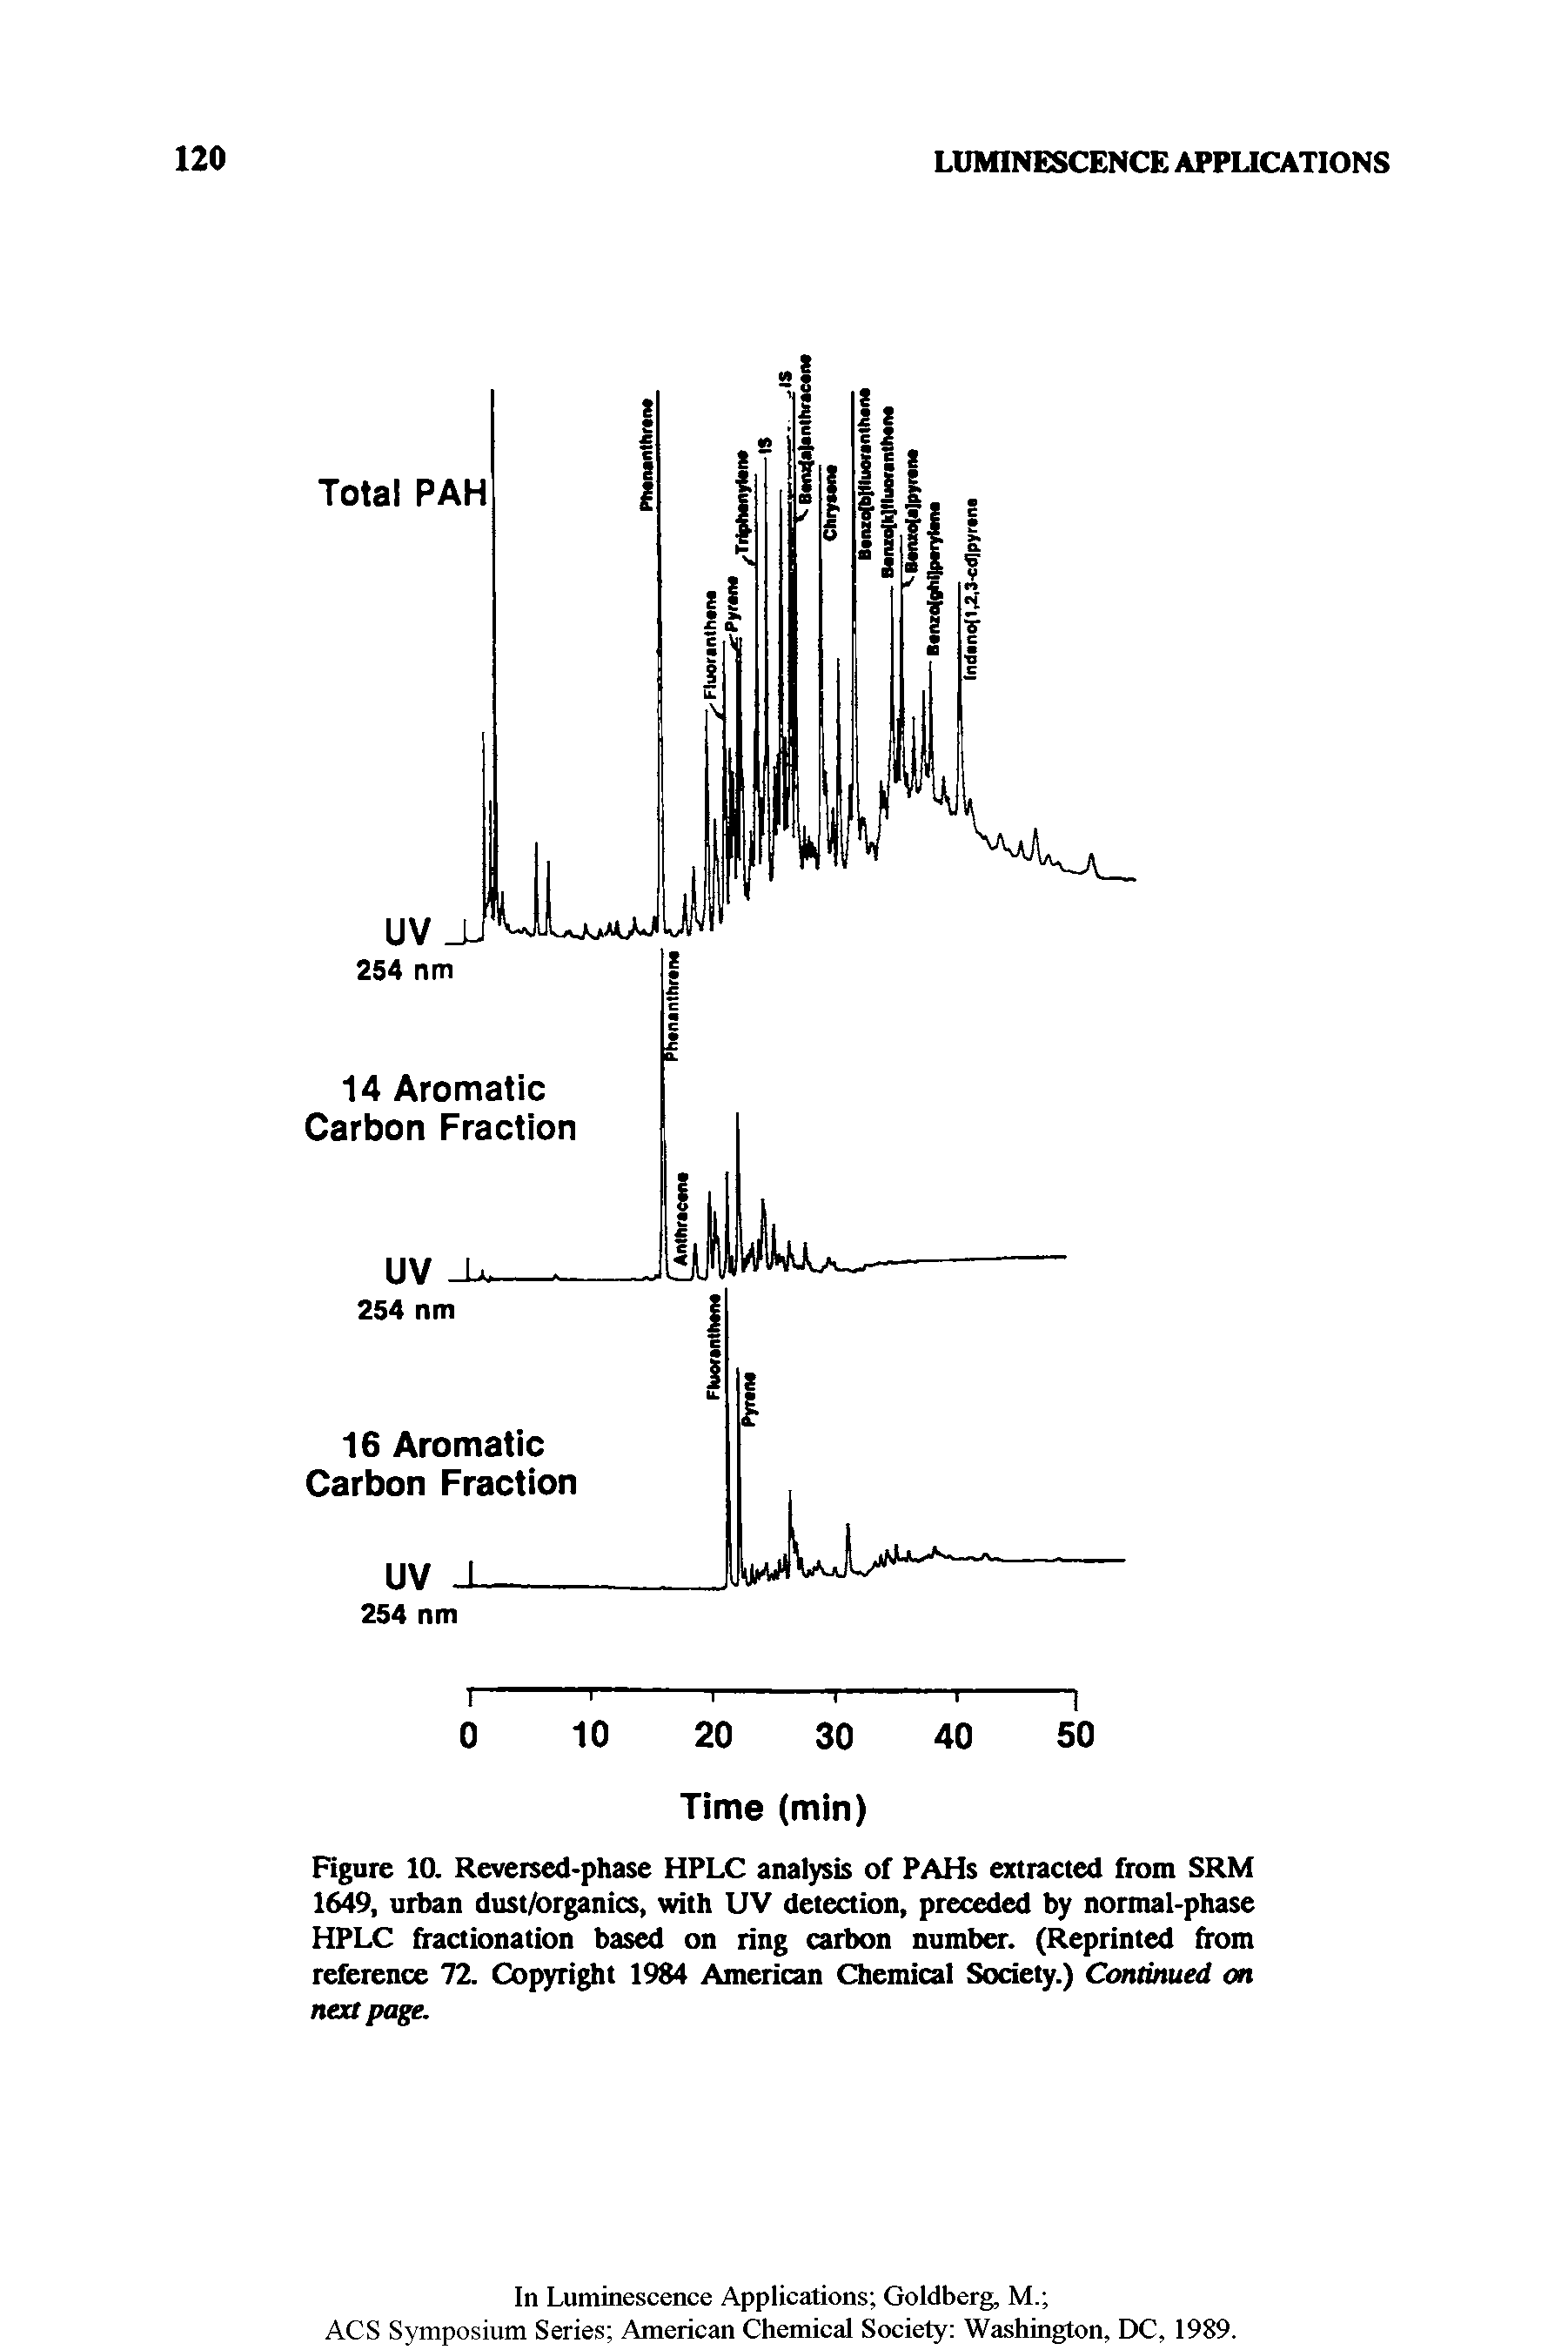 Figure 10. Reversed-phase HPLC analysis of PAHs extracted from SRM 1649, urban dust/organics, with UV detection, preceded by normal-phase HPLC fractionation based on ring carbon number. (Reprinted from reference 72. Copyright 1984 American Chemical Society.) Continued on next page.